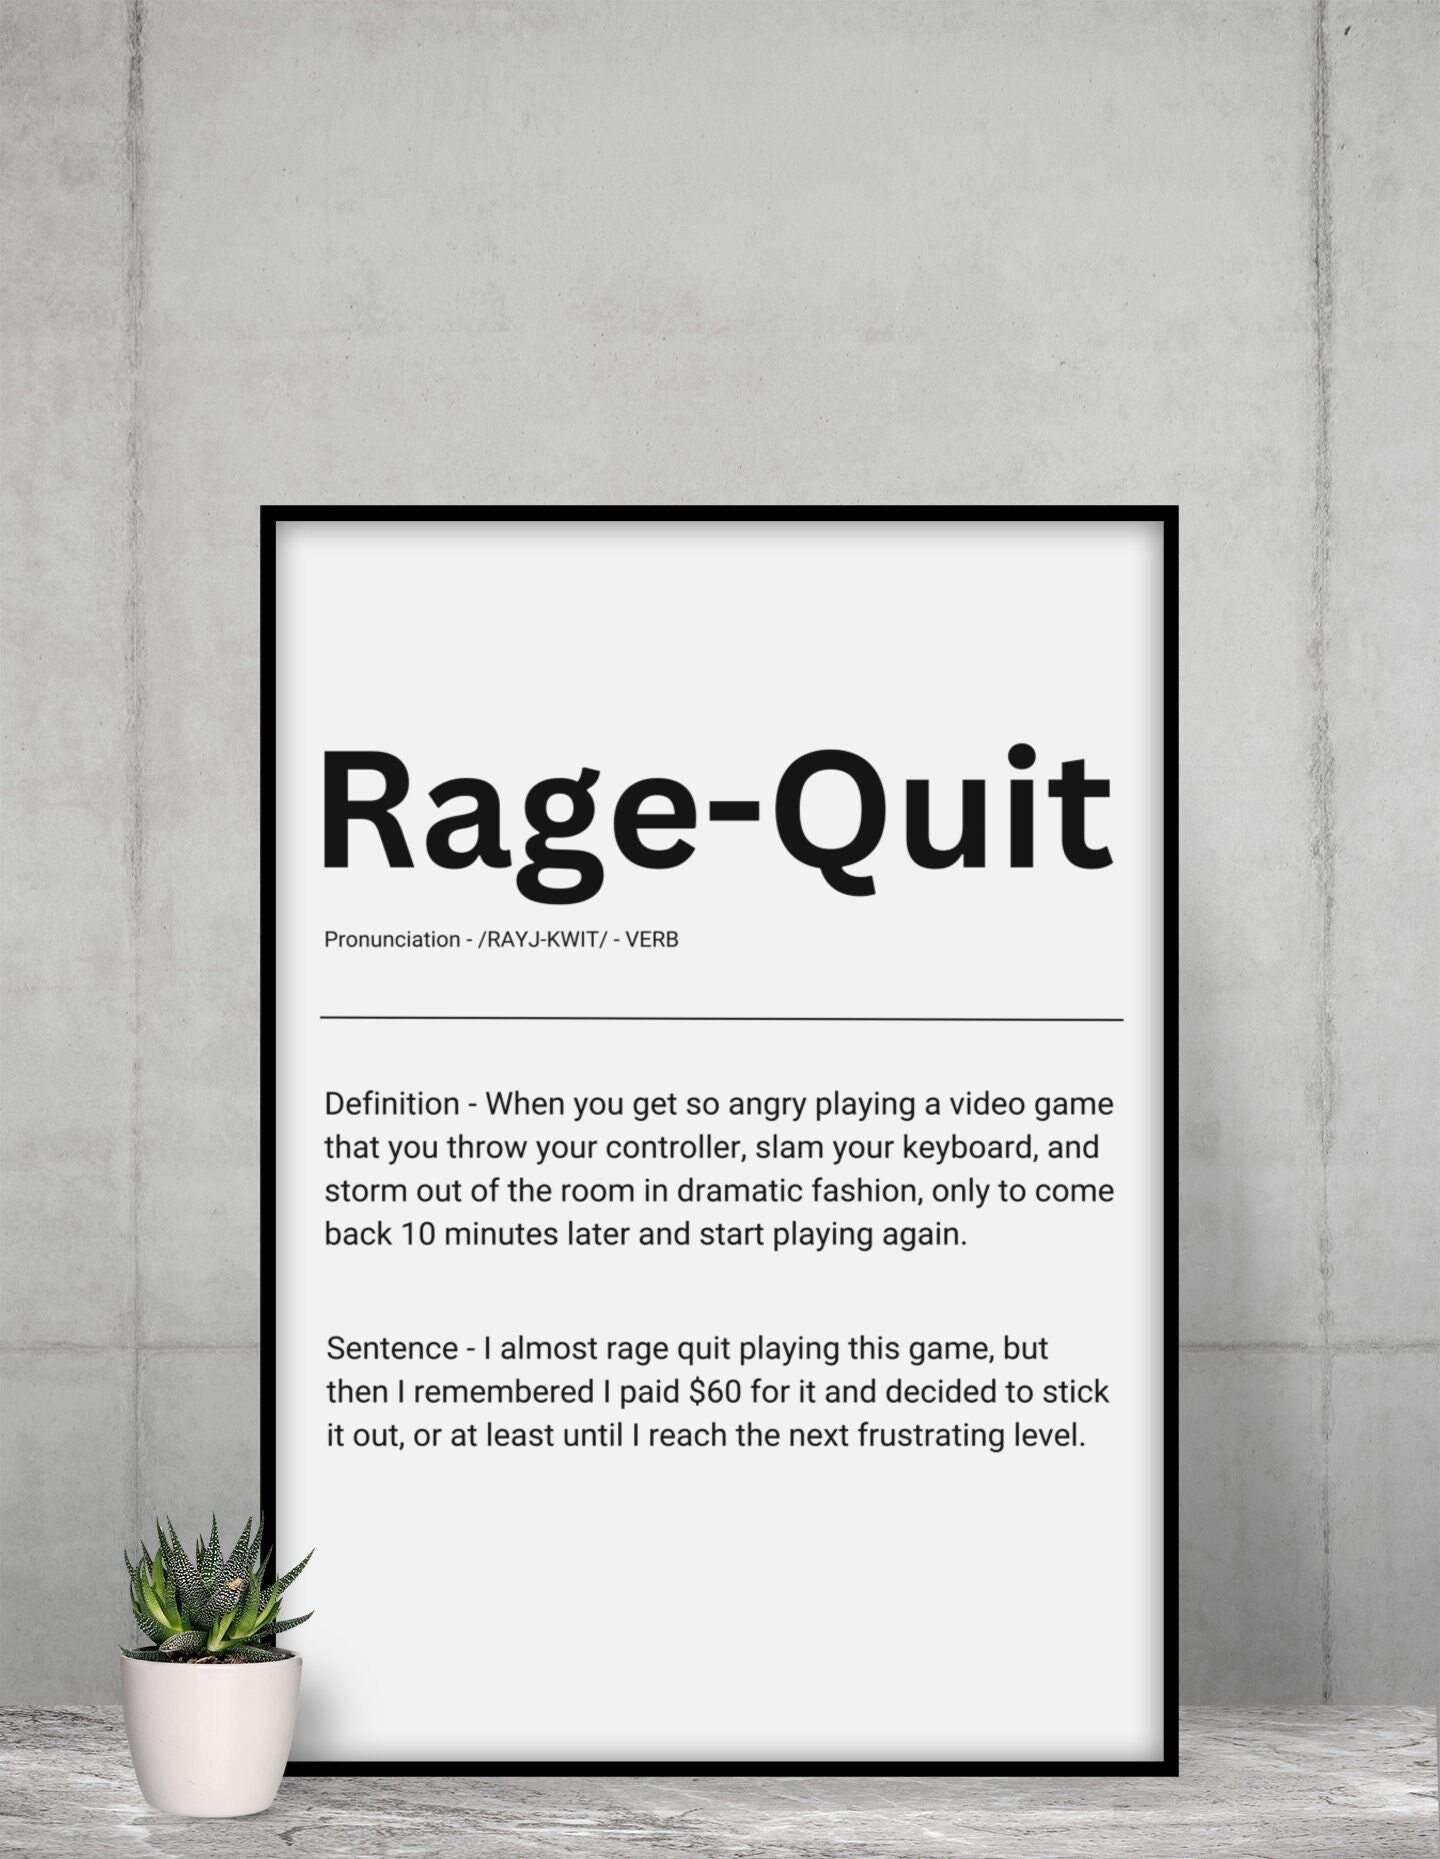 Games that make you rage quit - Forums 